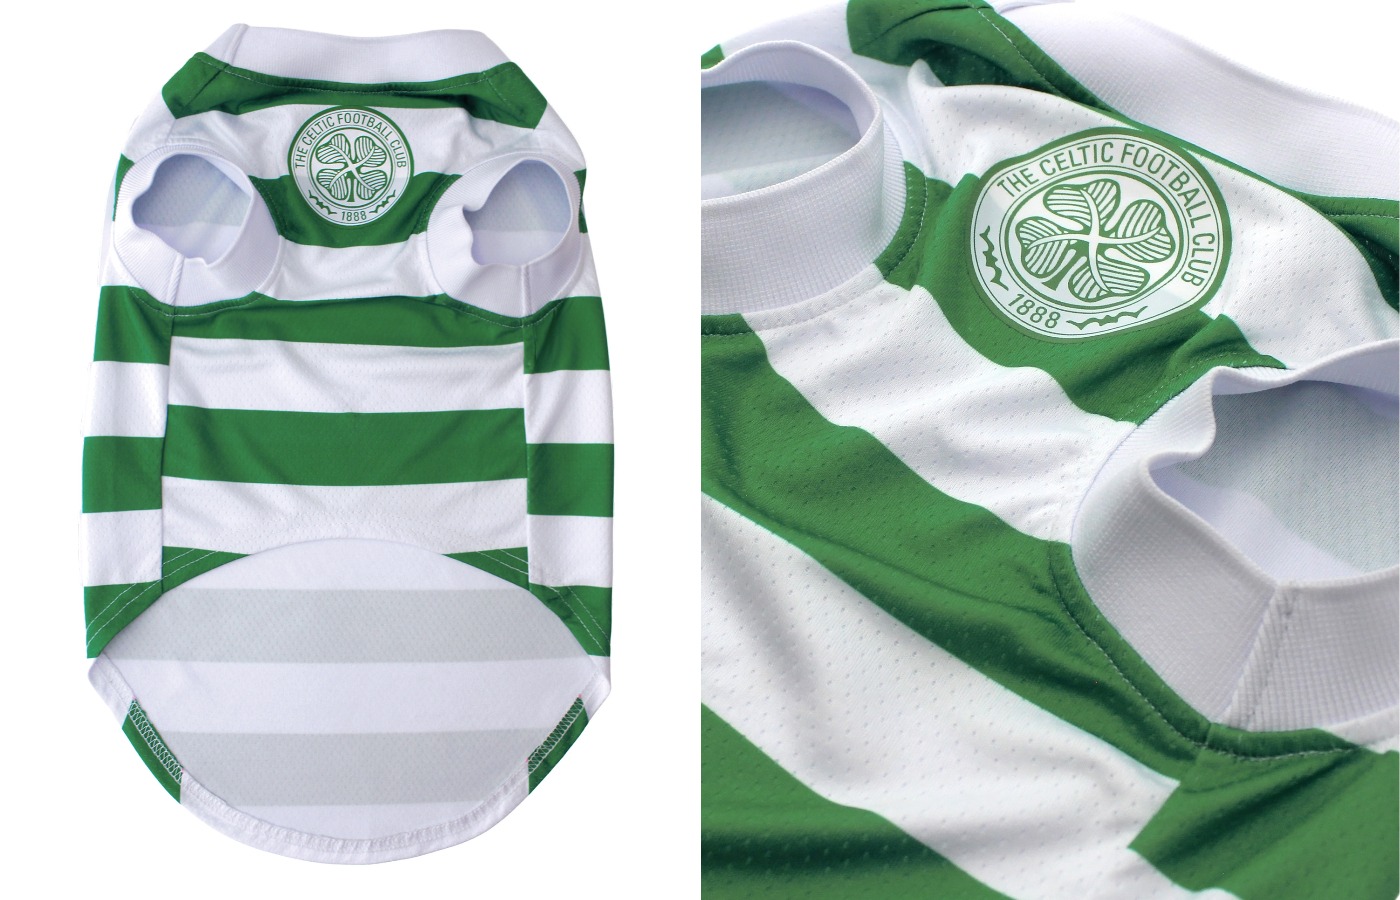 The shirts feature the Celtic club crest. 